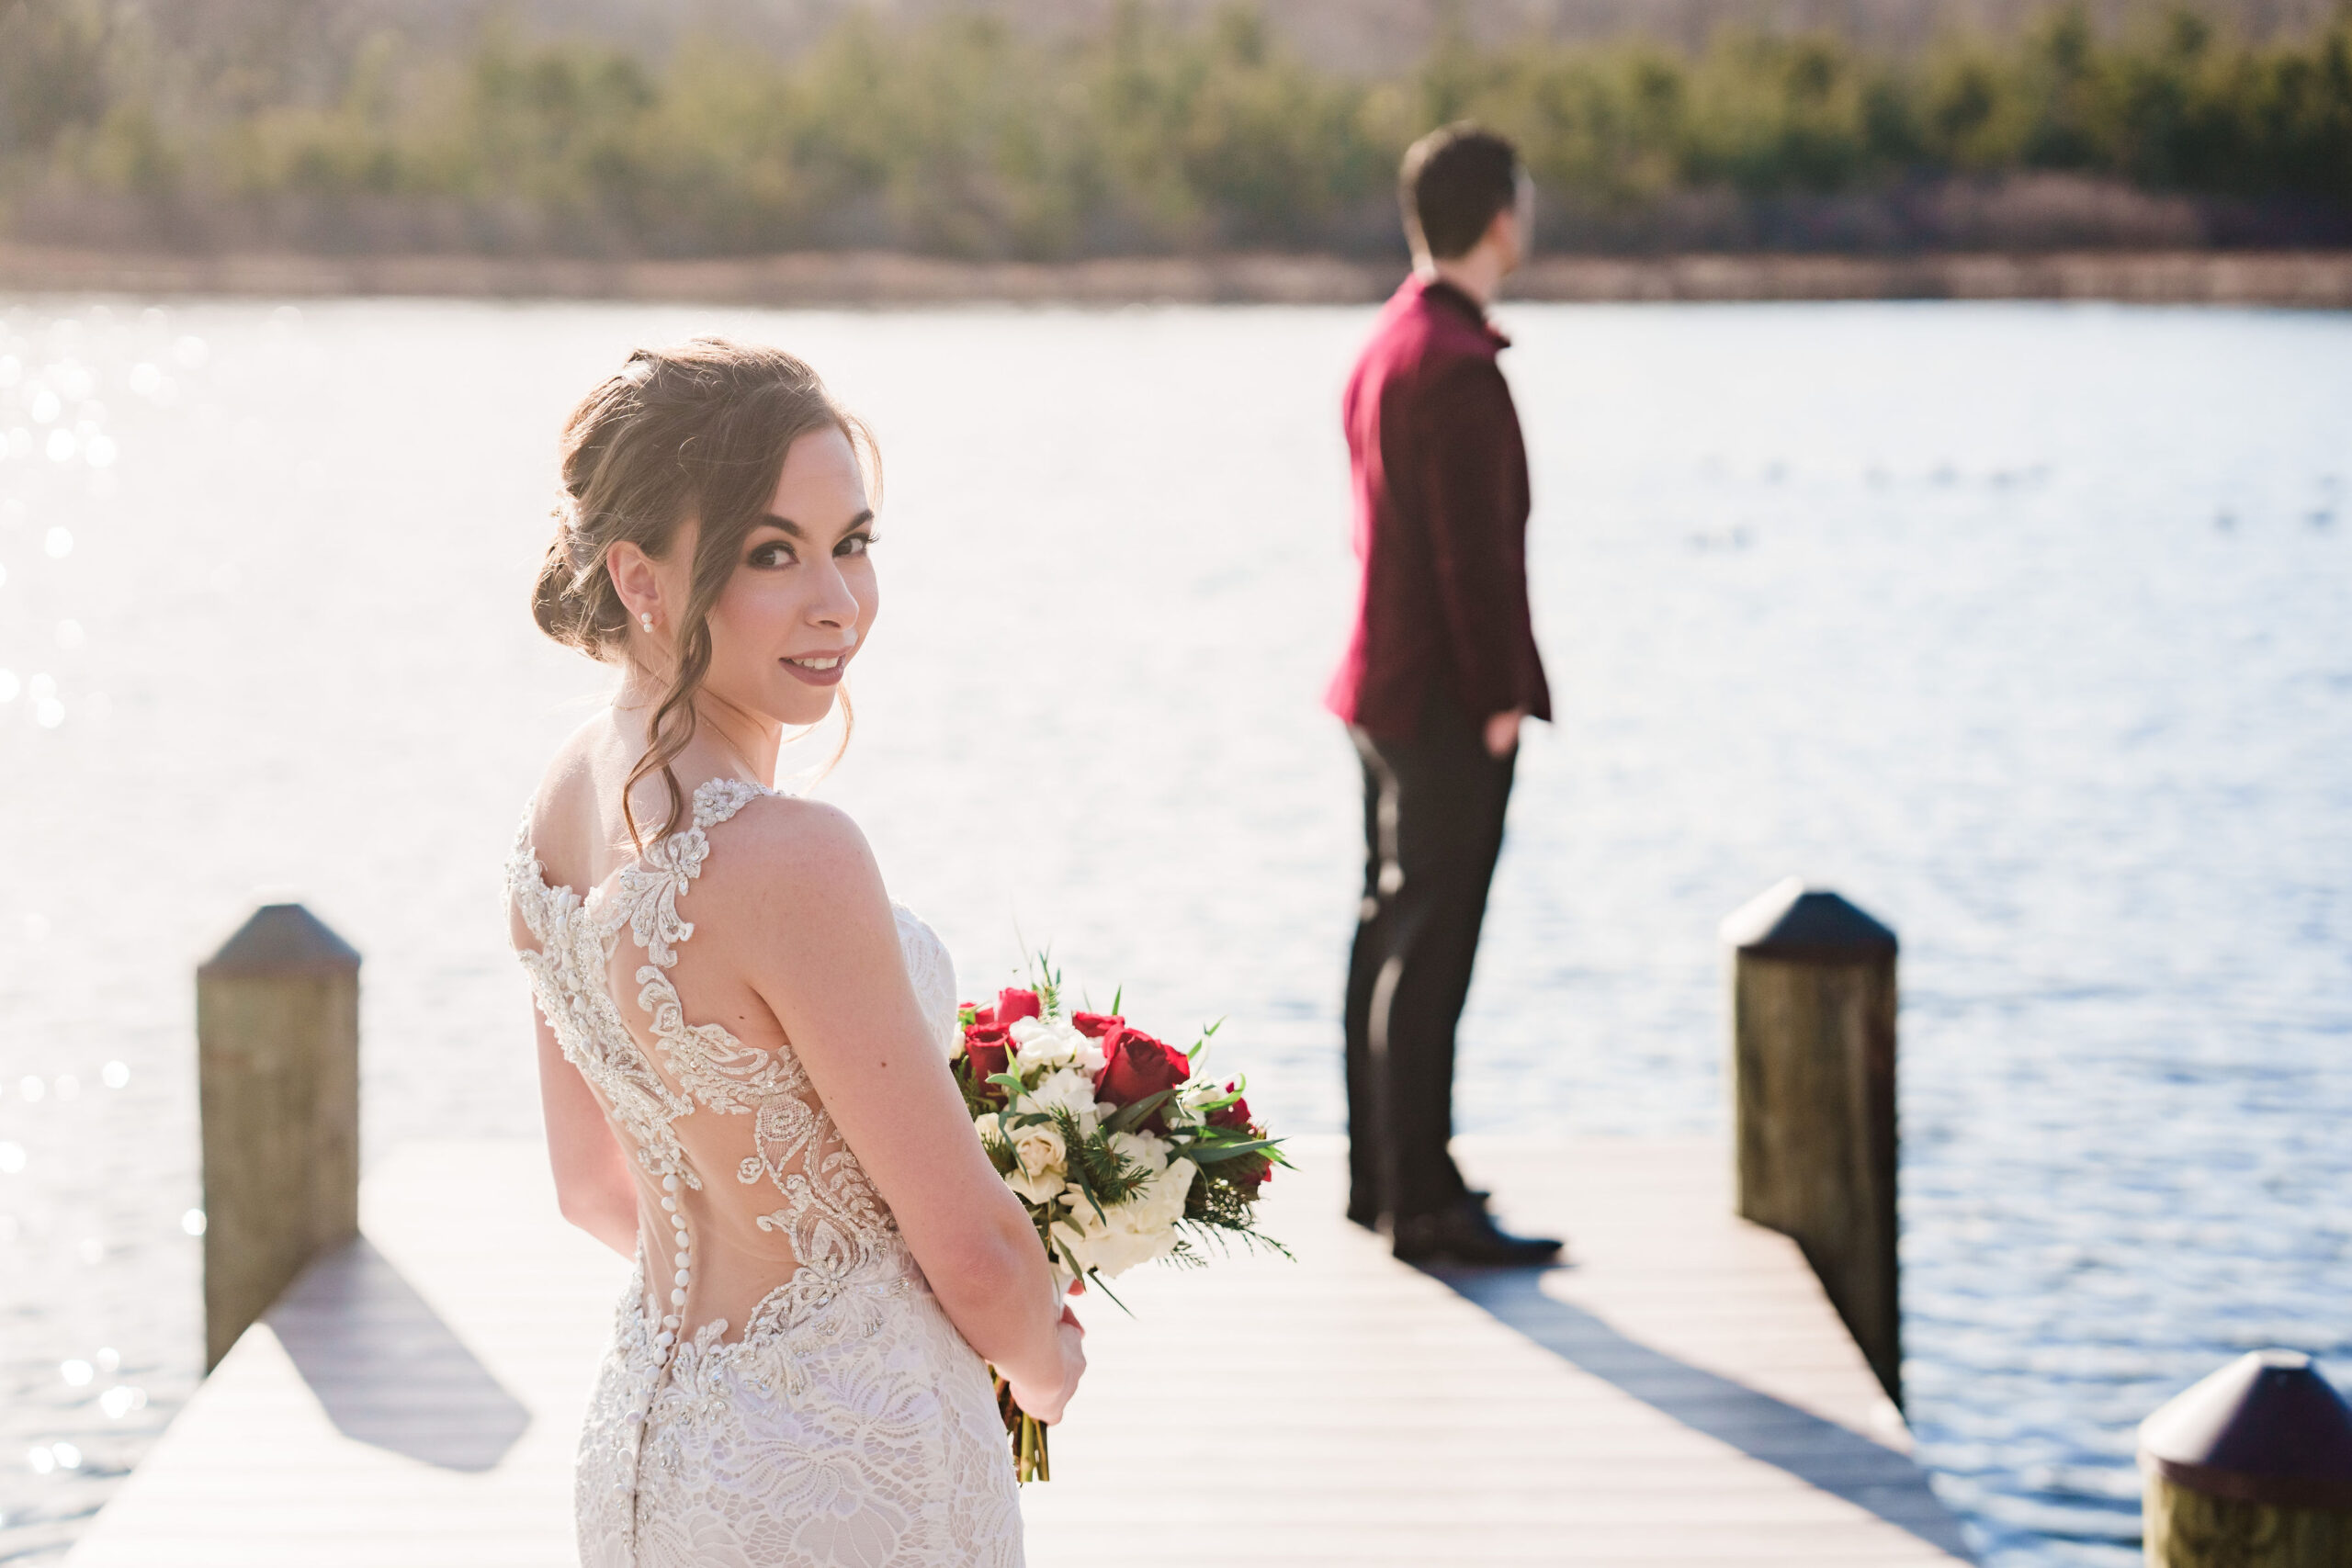 Lakeside Wedding Venues: Why Waterfront Weddings Are Popular